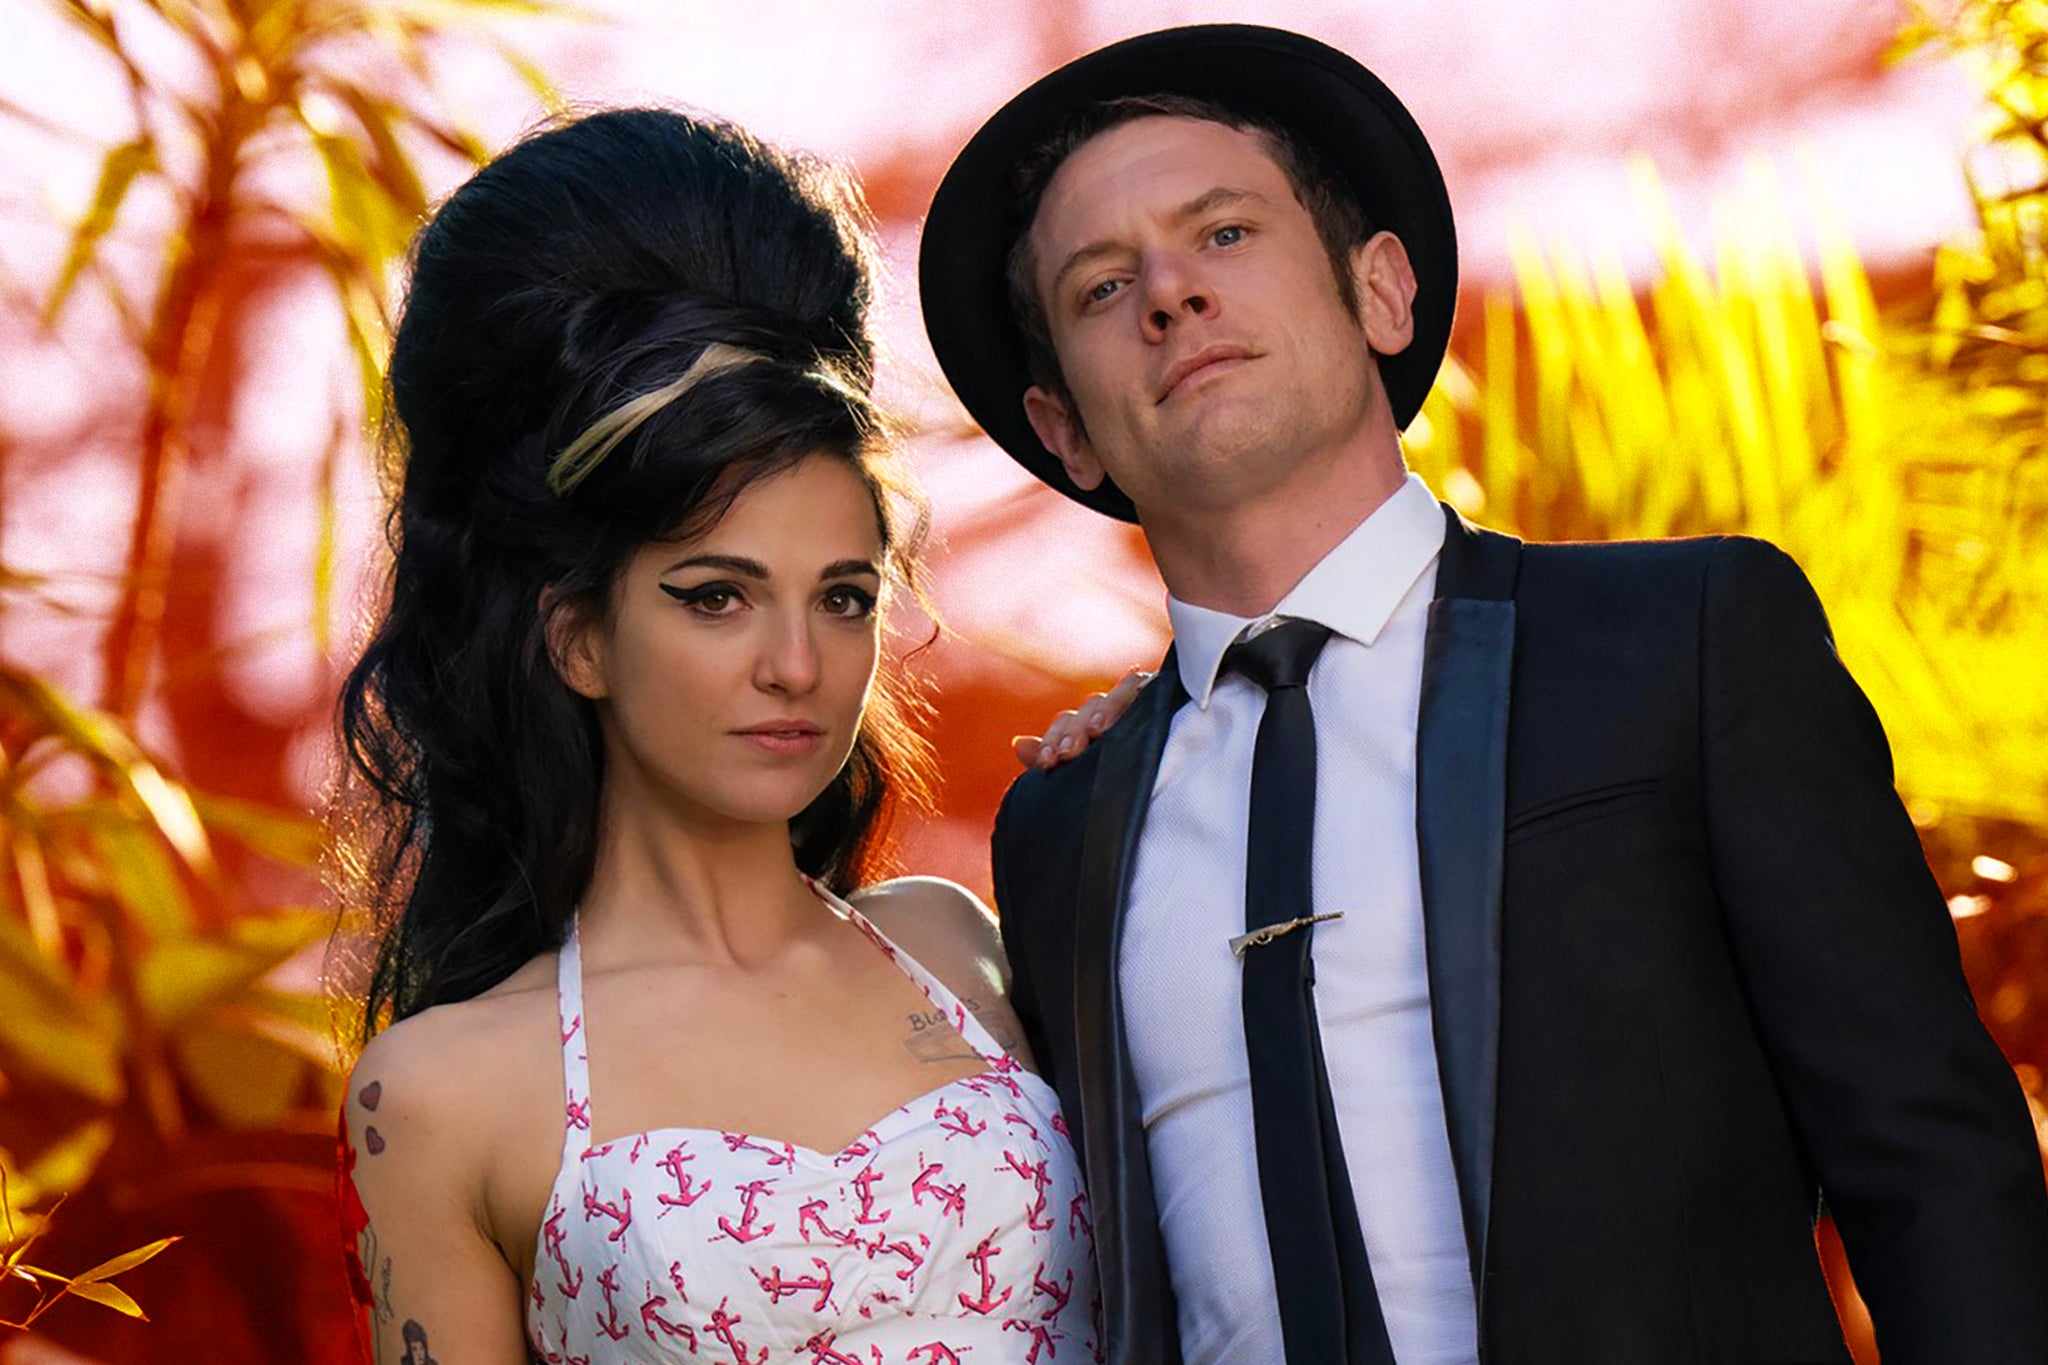 ‘There was no way I was going to get into anything that was scandal-based or disrespectful’: Marisa Abela and Jack O’Connell as Amy Winehouse and Blake Fielder-Civil in ‘Back to Black’